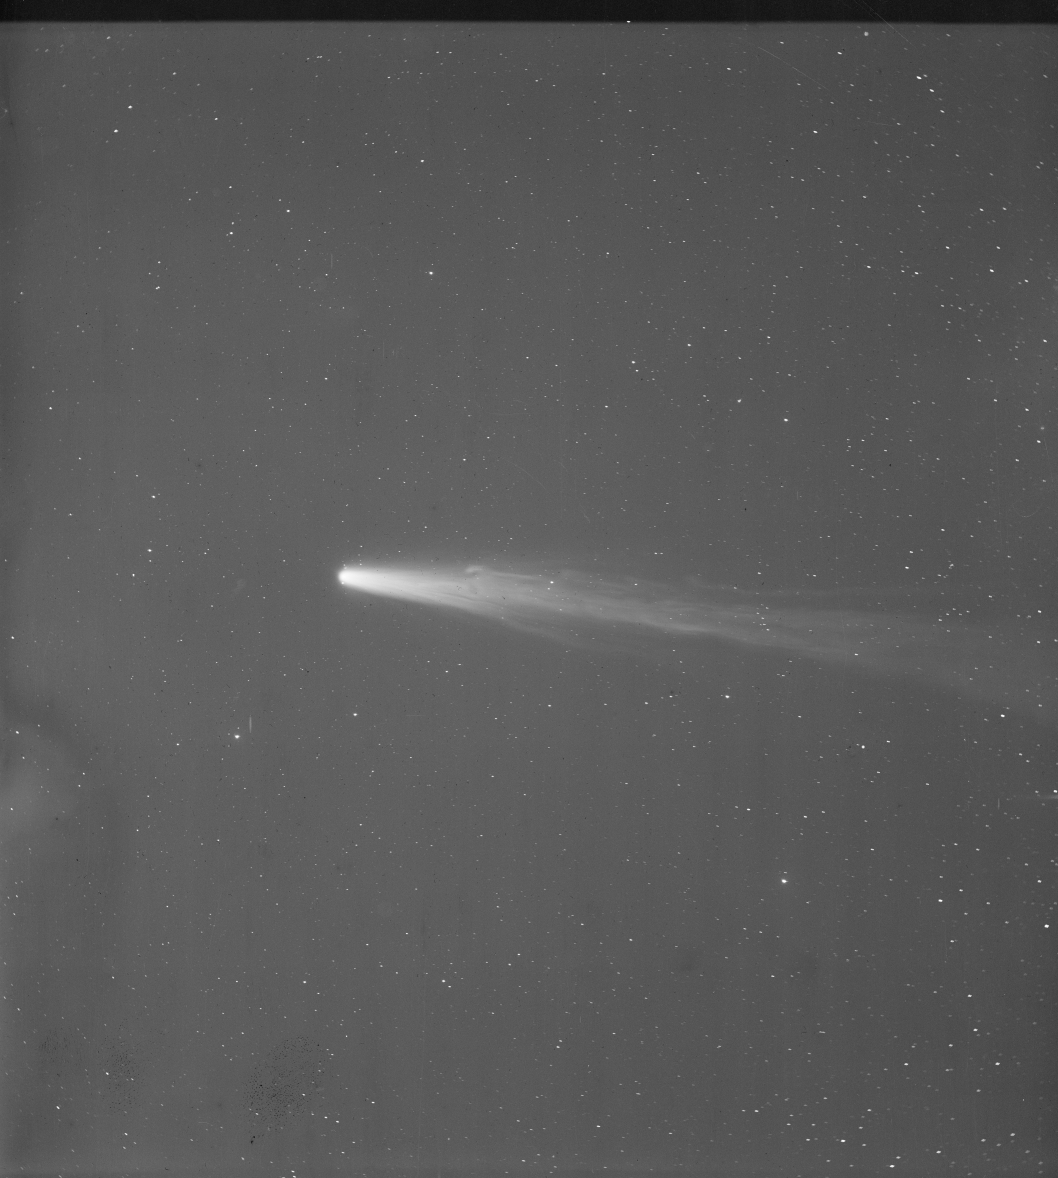 A black and white photograph of Halley's comet in the sky from 1910